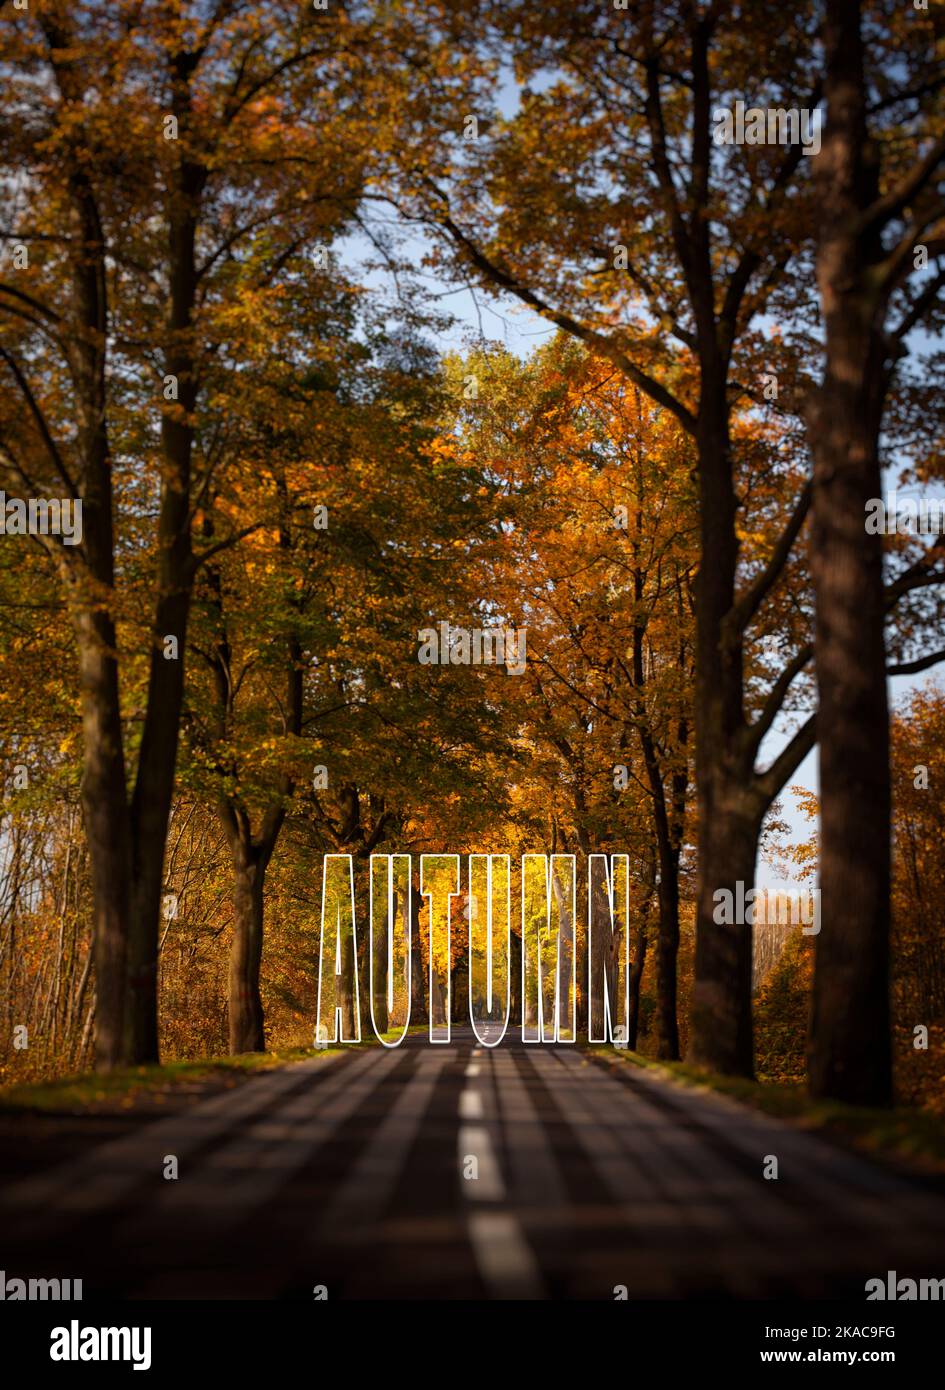 Autumn scenery, asphalt road and 'Autumn' sign Deteriorating road conditions, concepts Stock Photo